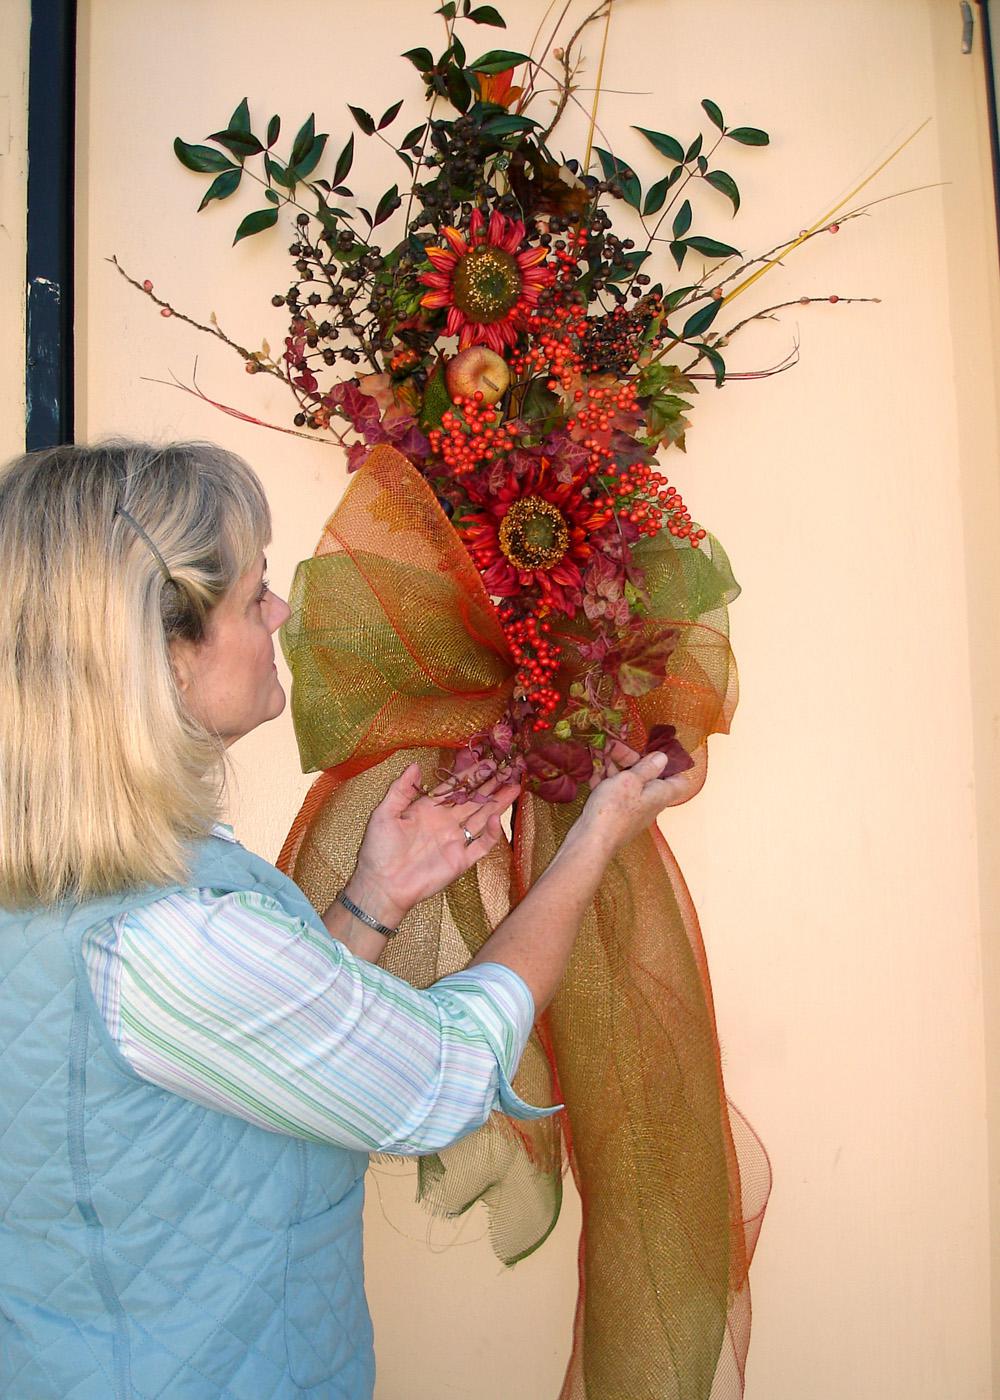 Create unique decorations and gifts for less using resources from gardens, fields and woods. Lelia Kelly puts the finishing touches on a door swag she made using crape myrtle seed pods, nandina foliage and berries, English ivy and bare branches, highlighted with silk sunflowers and other silk materials. (Photo by Vickie McGee)